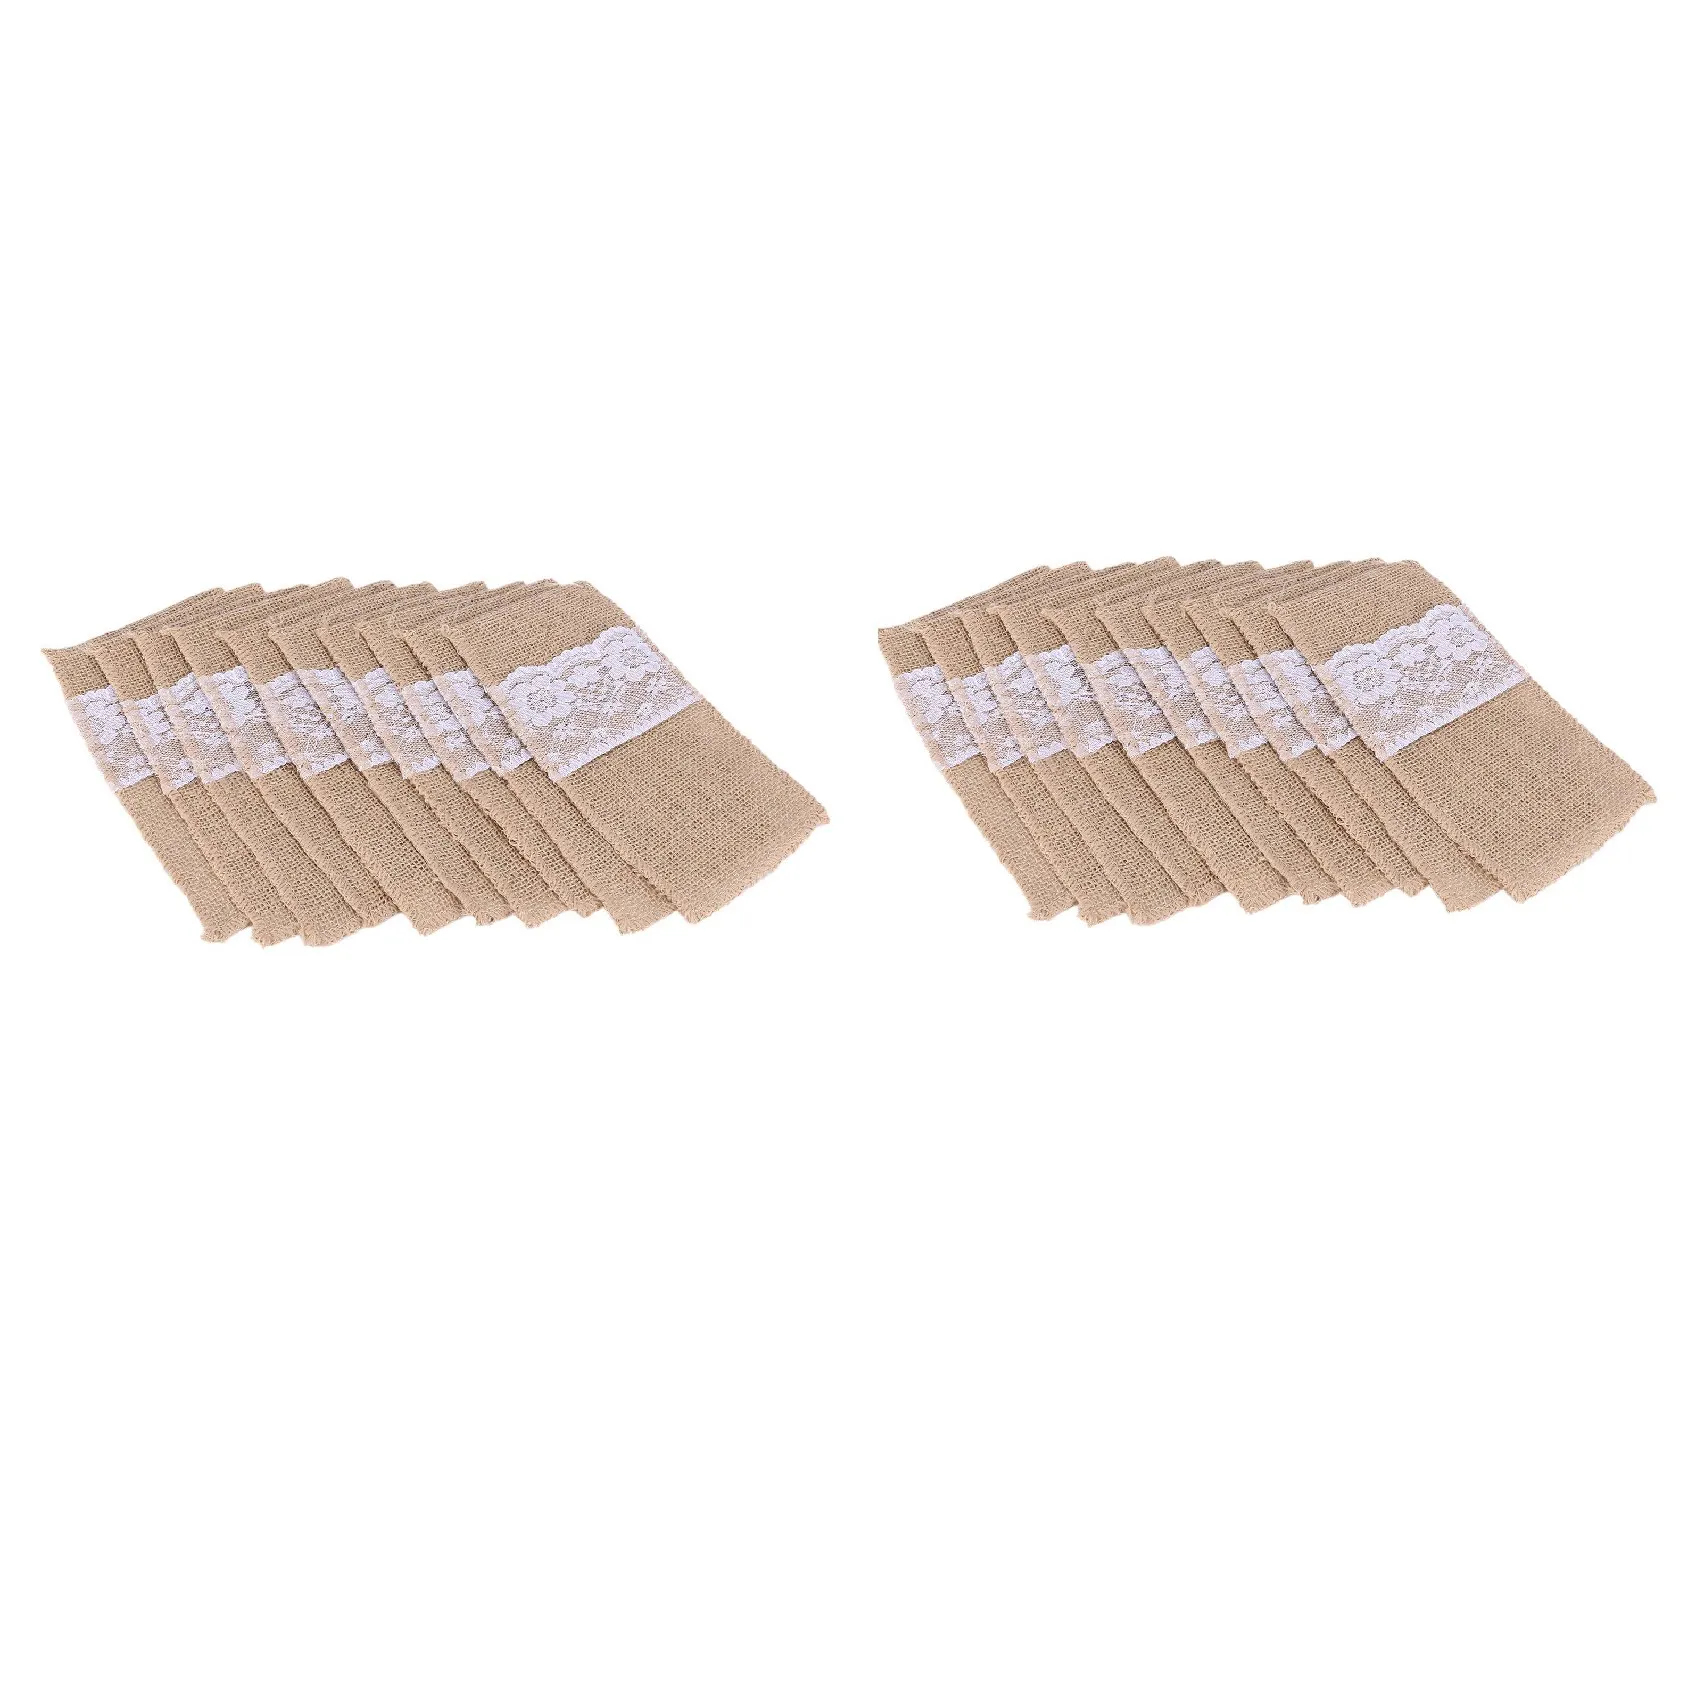 

100pcs Natural Jute Cutlery Knives and Forks Cutlery Set Silverware Bag Holder Burlap & Lace Party Wedding Decor 21x11cm